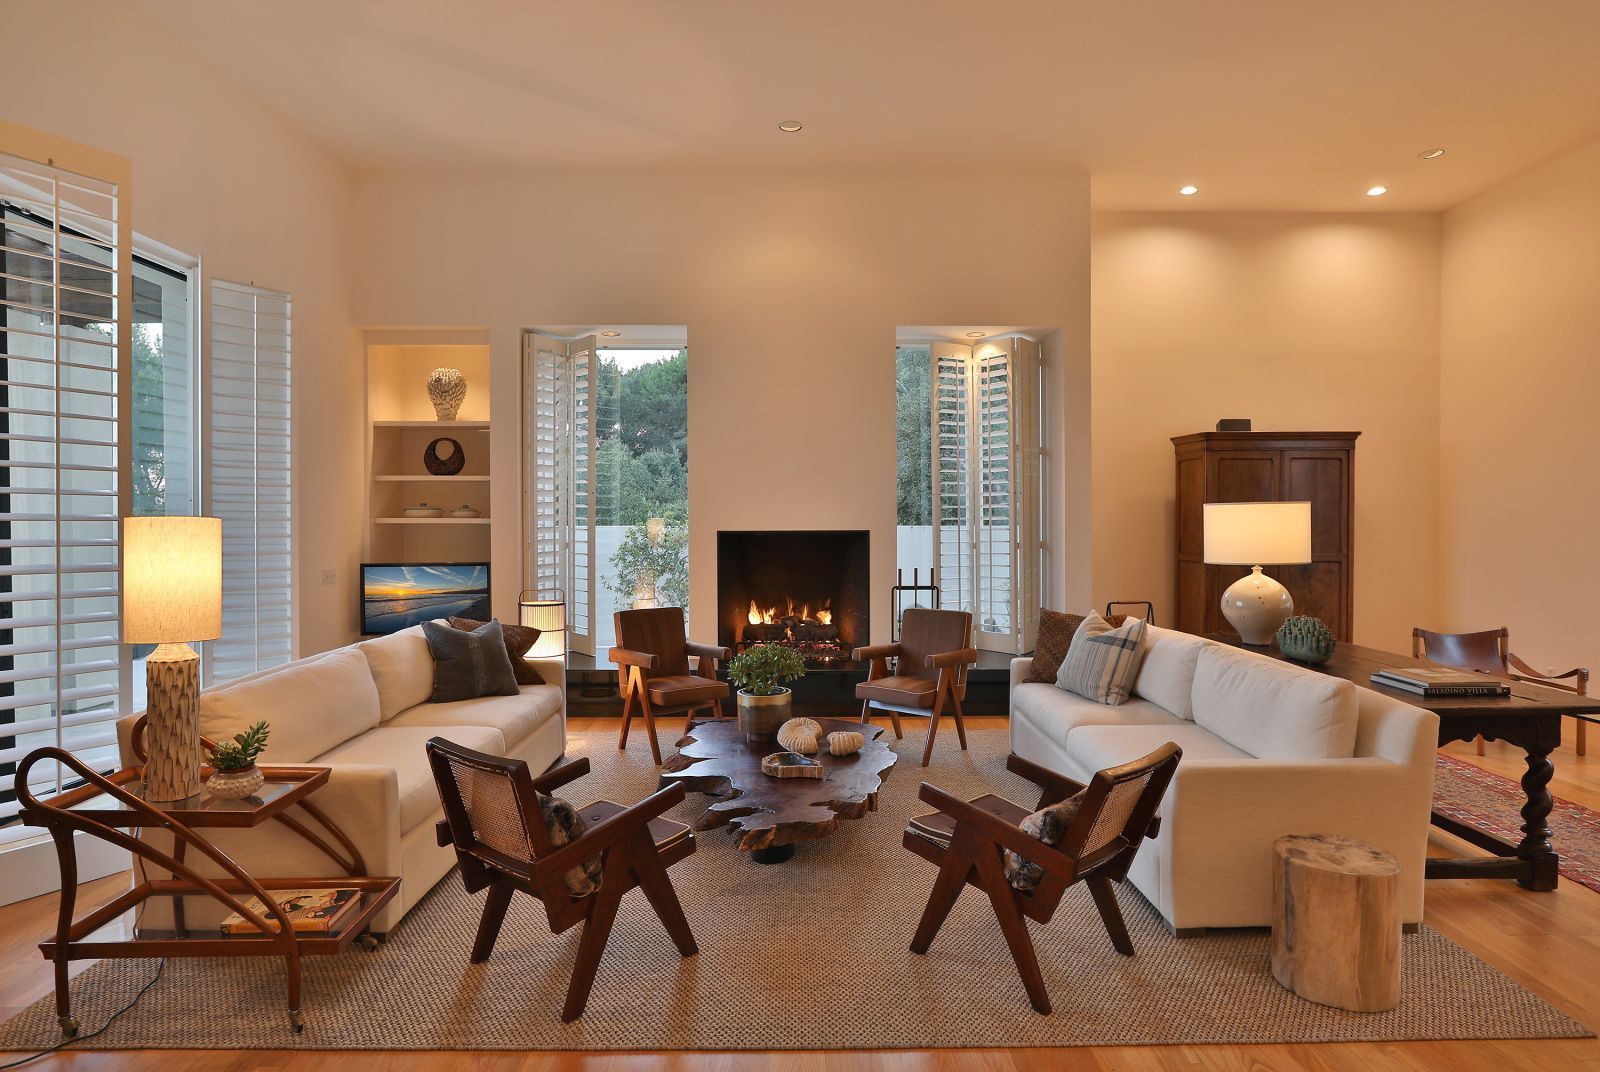 The pristine living room with lit fireplace of a modern estate for lease.